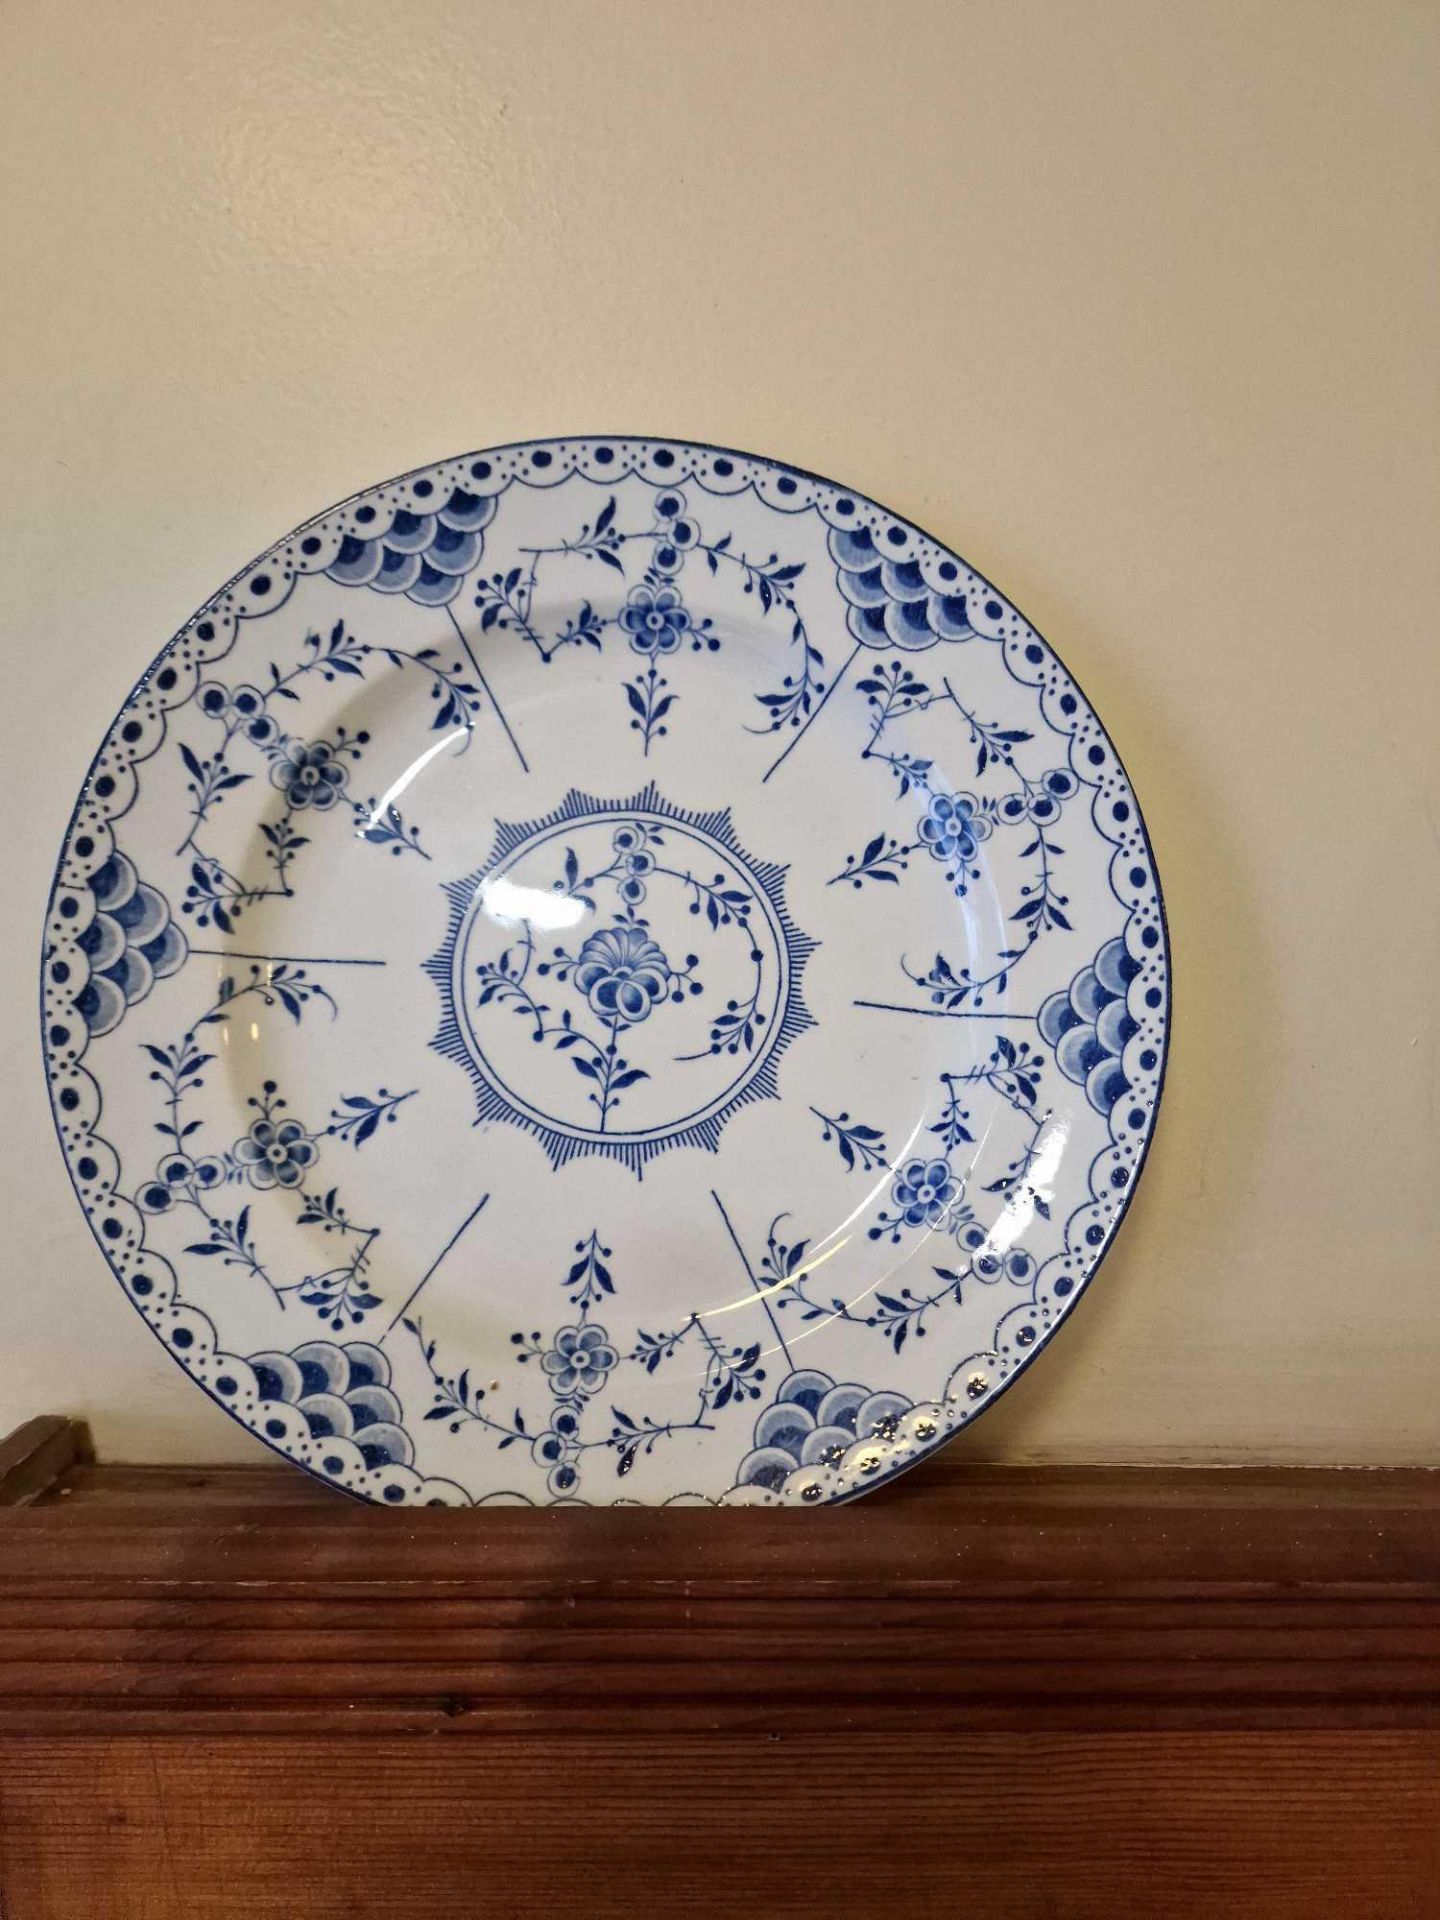 5 X Decorative Wall Plates Blue And White By Saxon And Snowdon Flood - Image 2 of 6